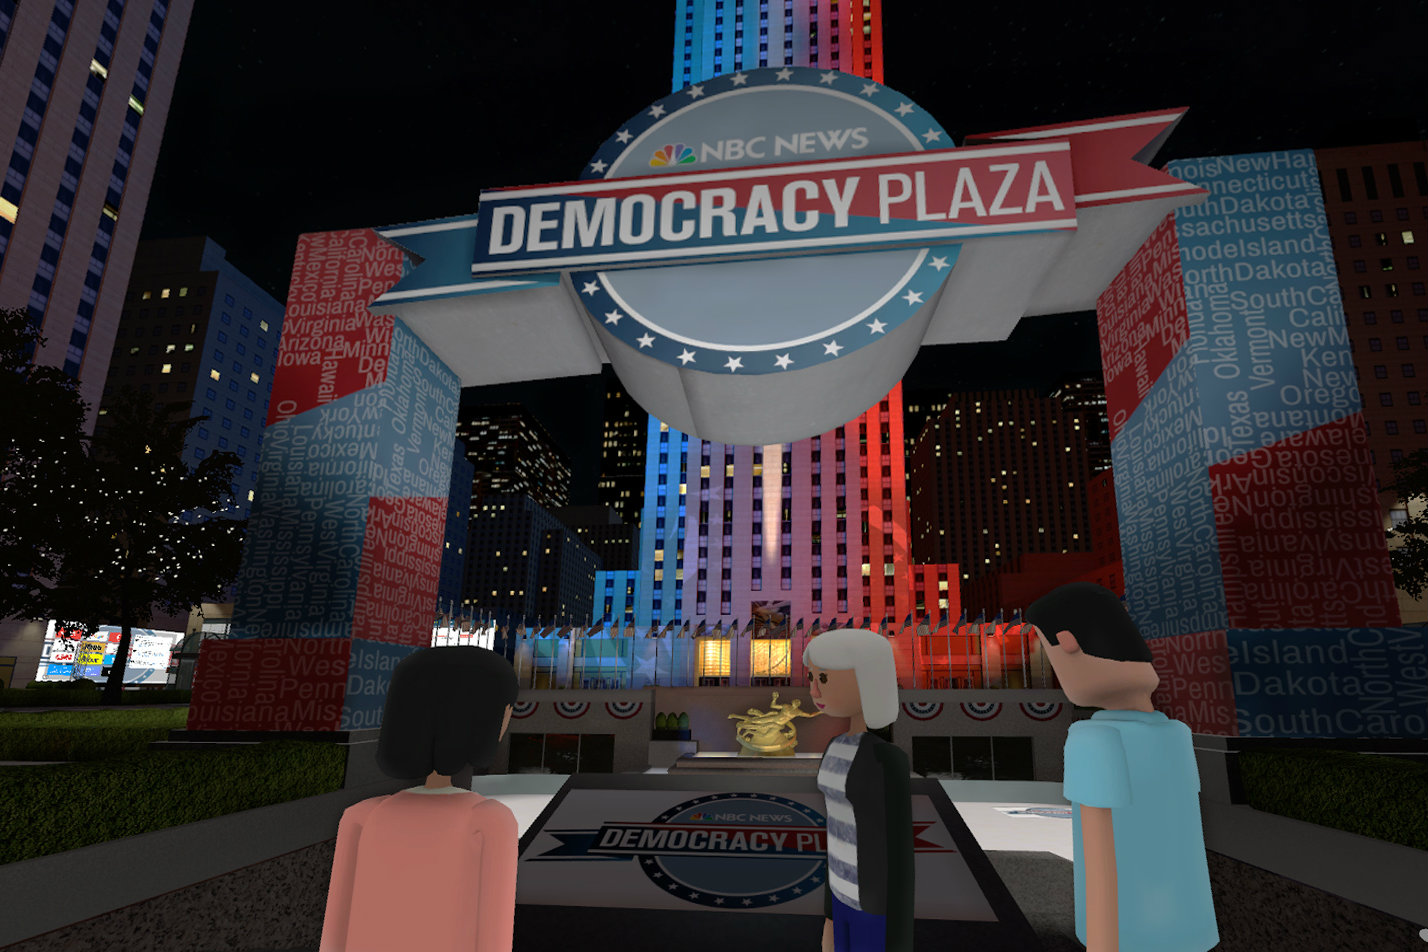 Tech Transforms the Election Experience, From VR to Voter Registration - AltspaceVR's Virtual Democracy Plaza